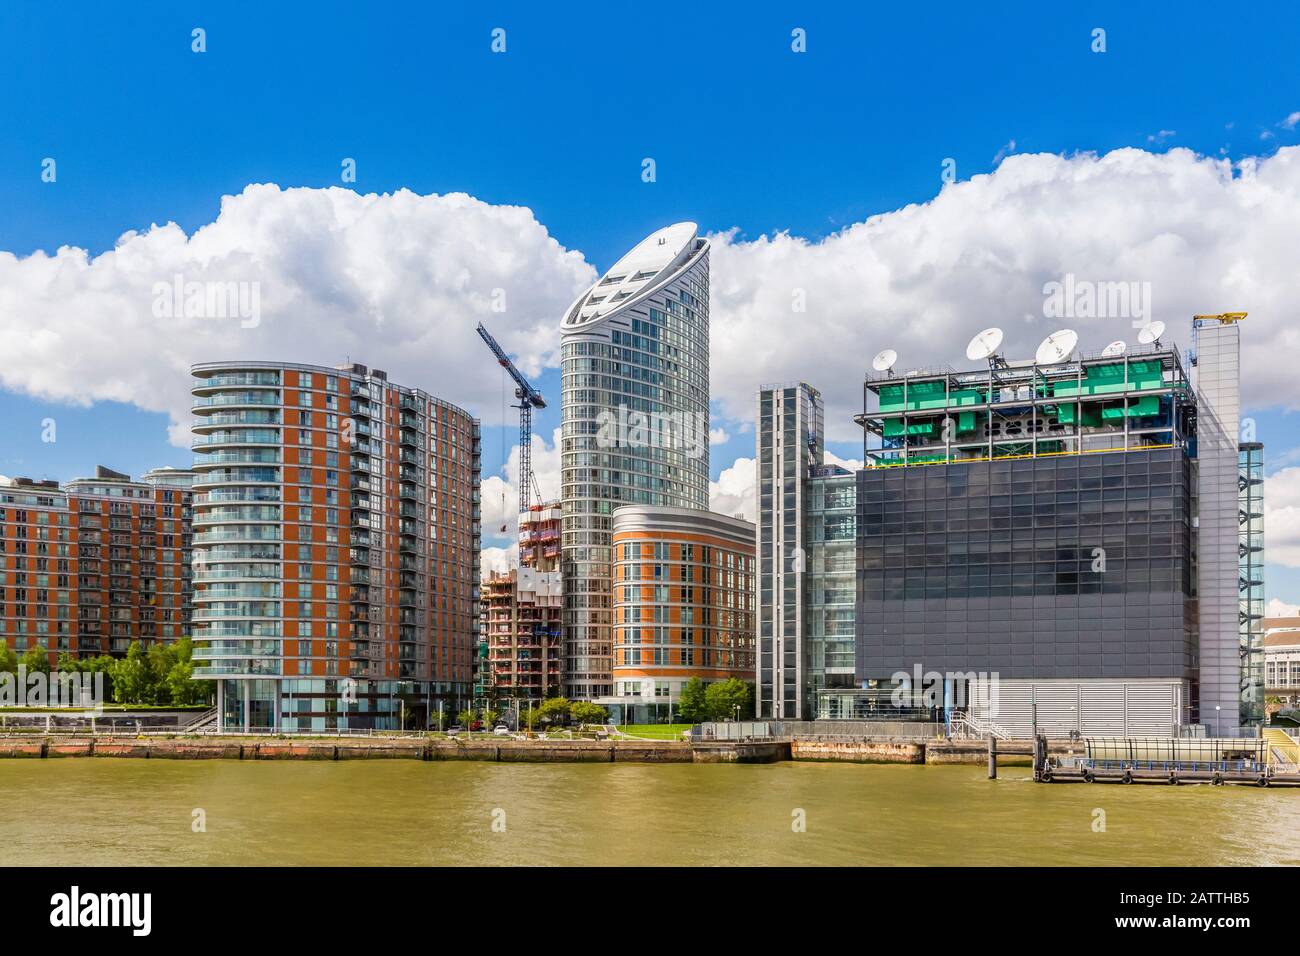 Modern architecture and skyscrapers of The Docklands, Isle of Dogs, London, England, United Kingdom Stock Photo